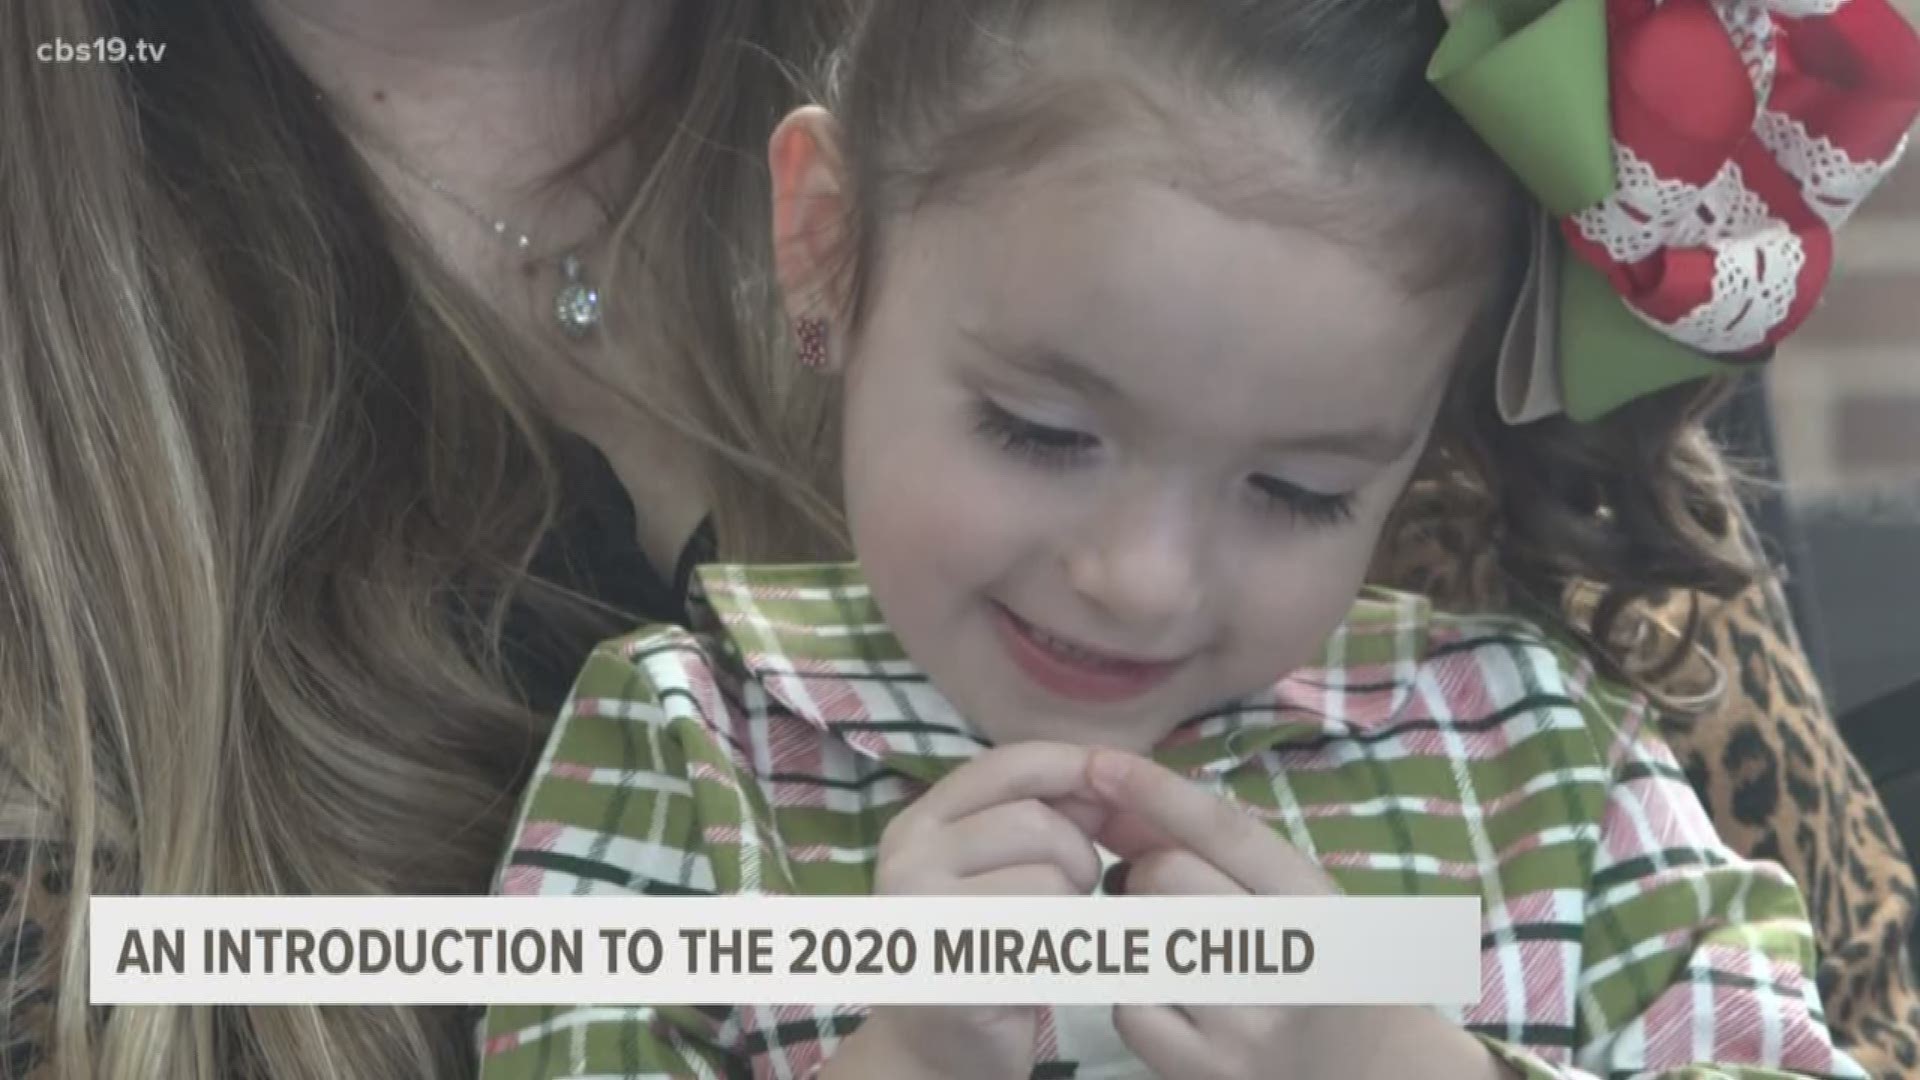 Kimber Jane De La Cruz is the 32nd Miracle Child to be named for CHRISTUS Trinity Mother Frances-Tyler Hospital.